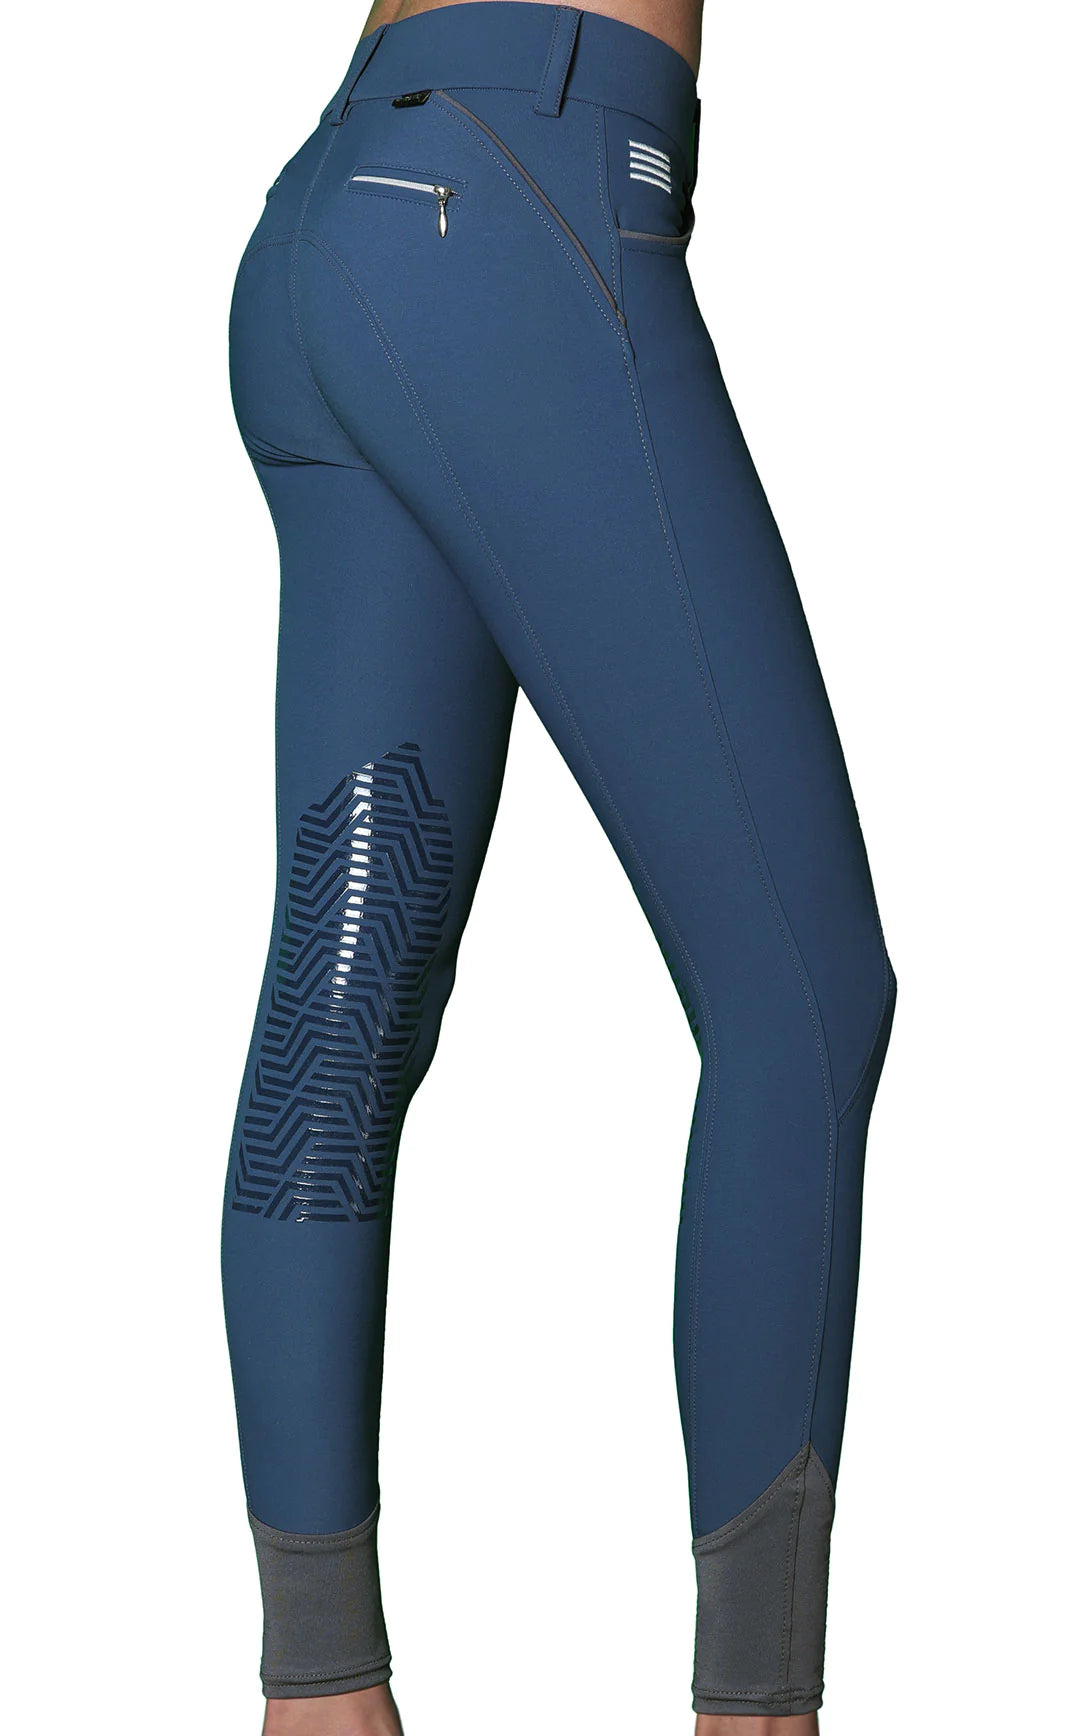 Redsware Technical Riding Legging - Gee Gee Equine